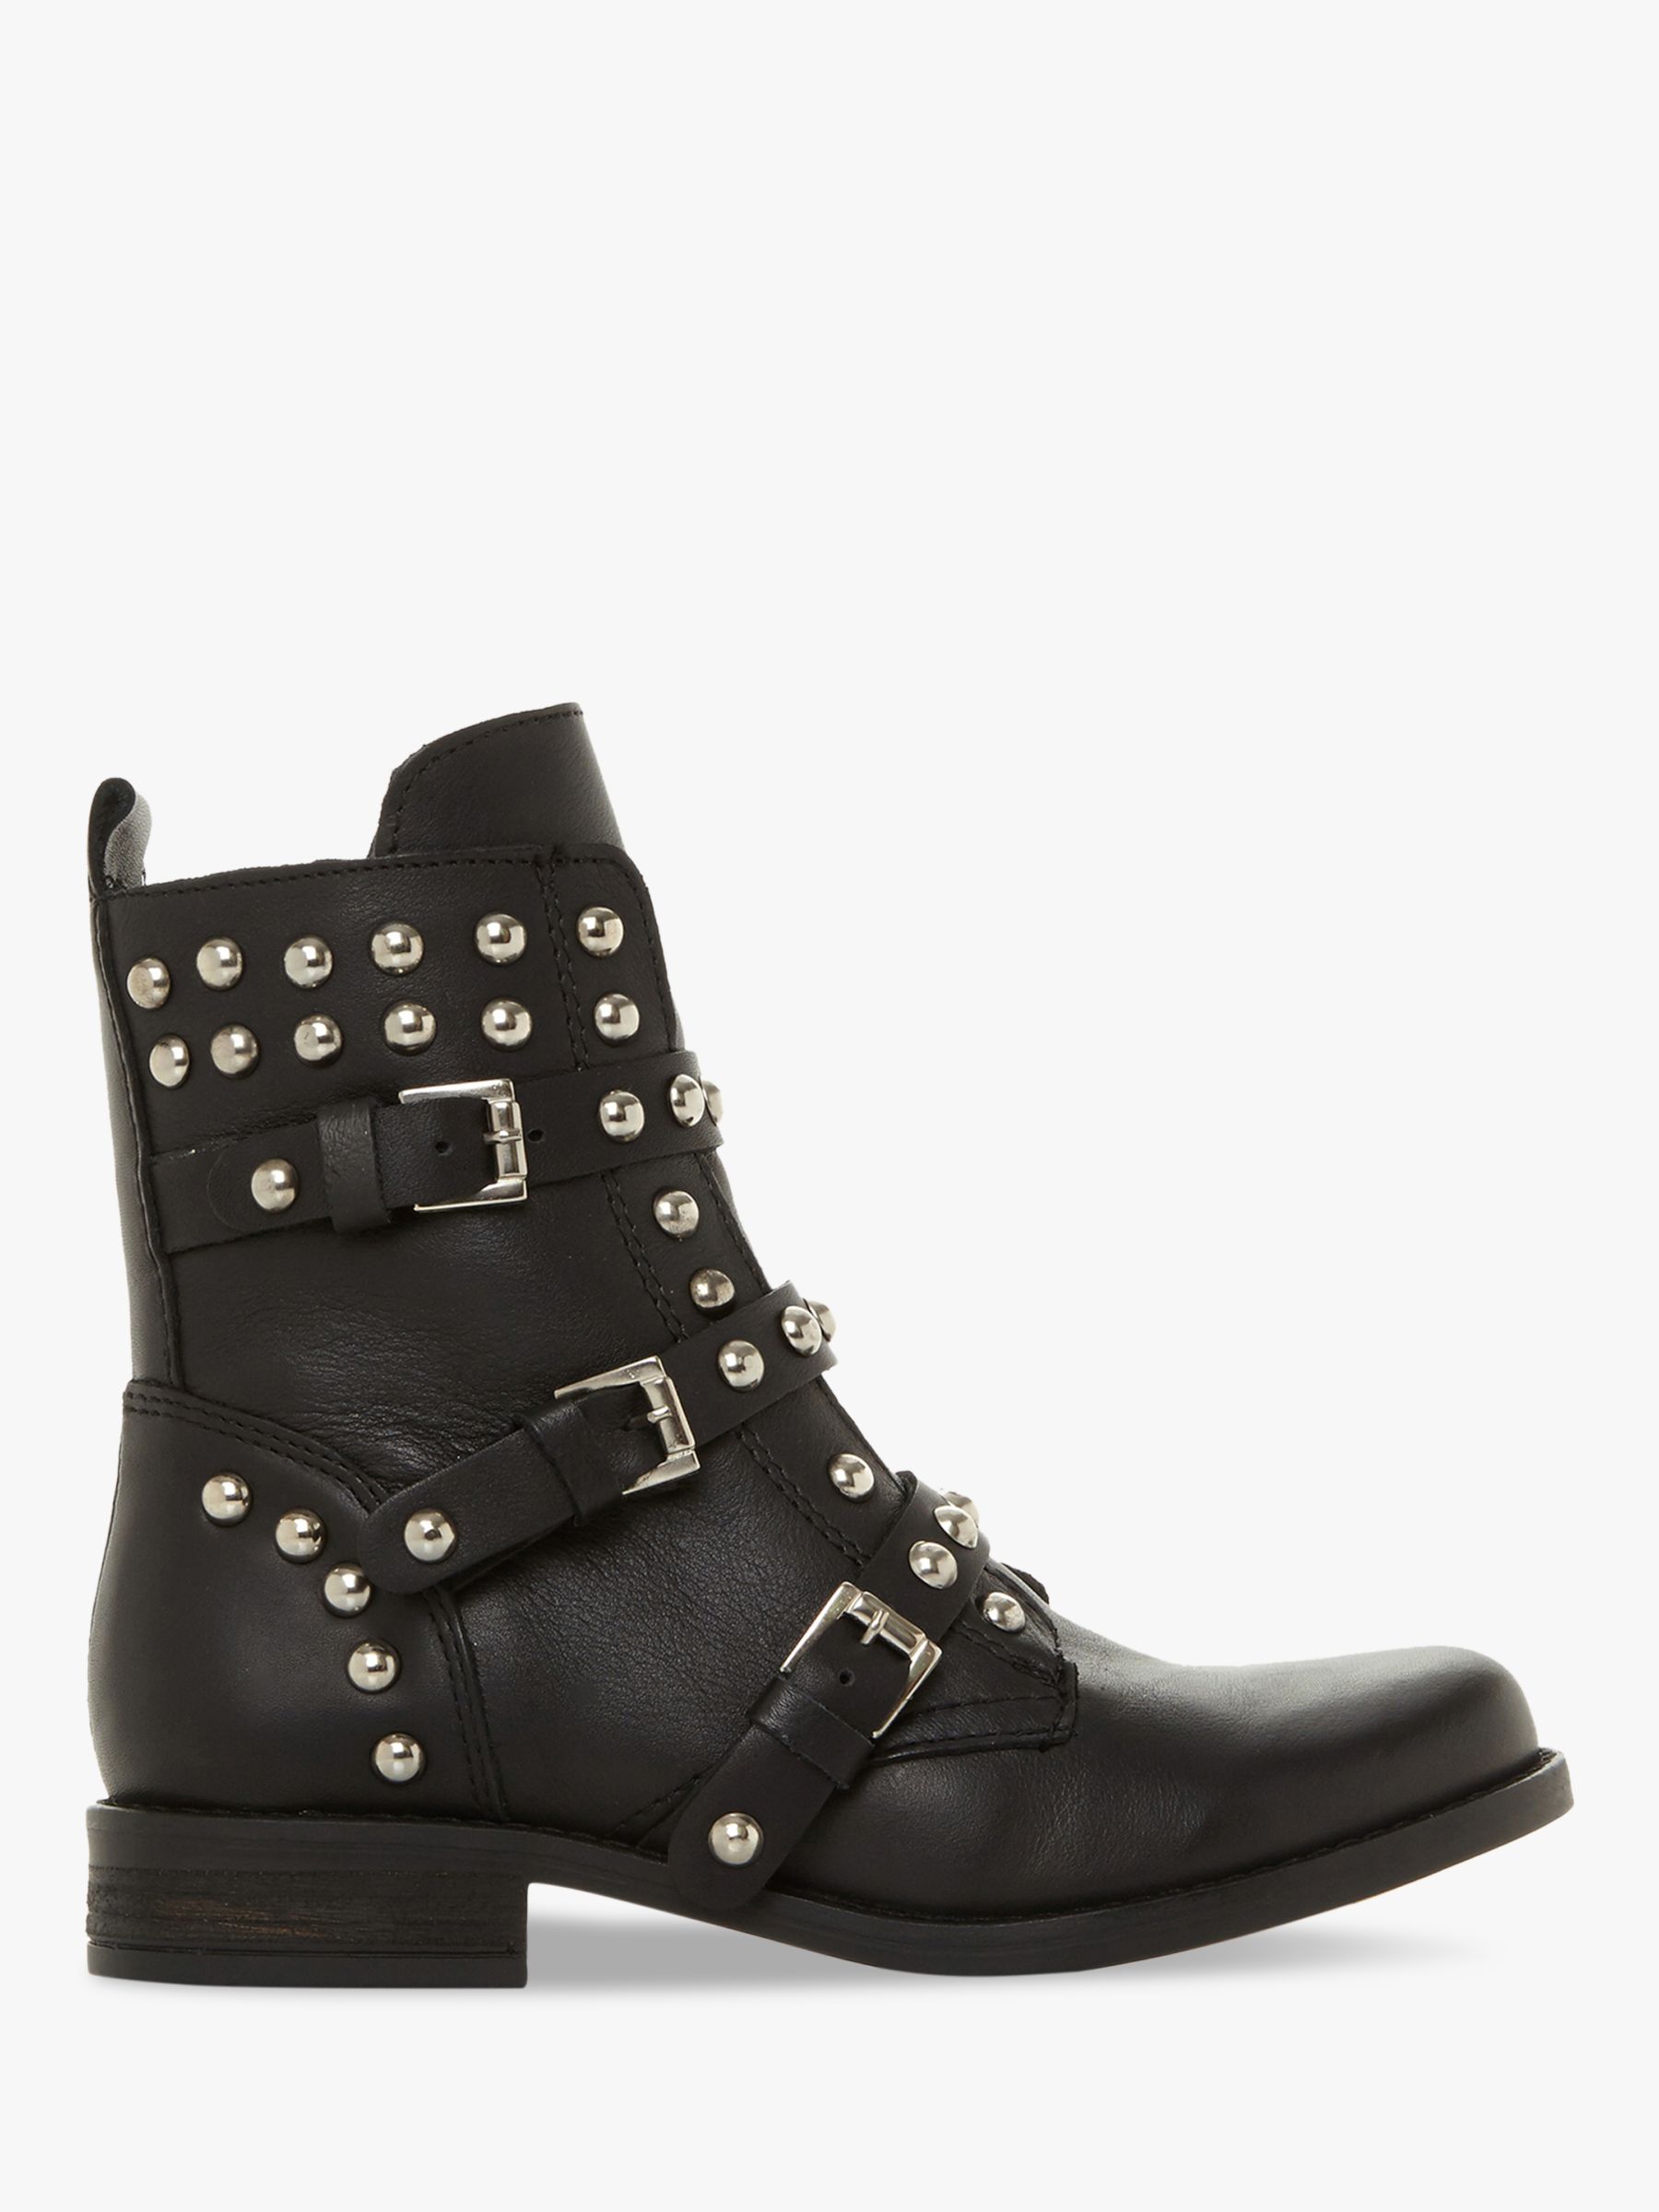 Steve Madden Spunky Ankle Boots, Black Leather at John Lewis & Partners